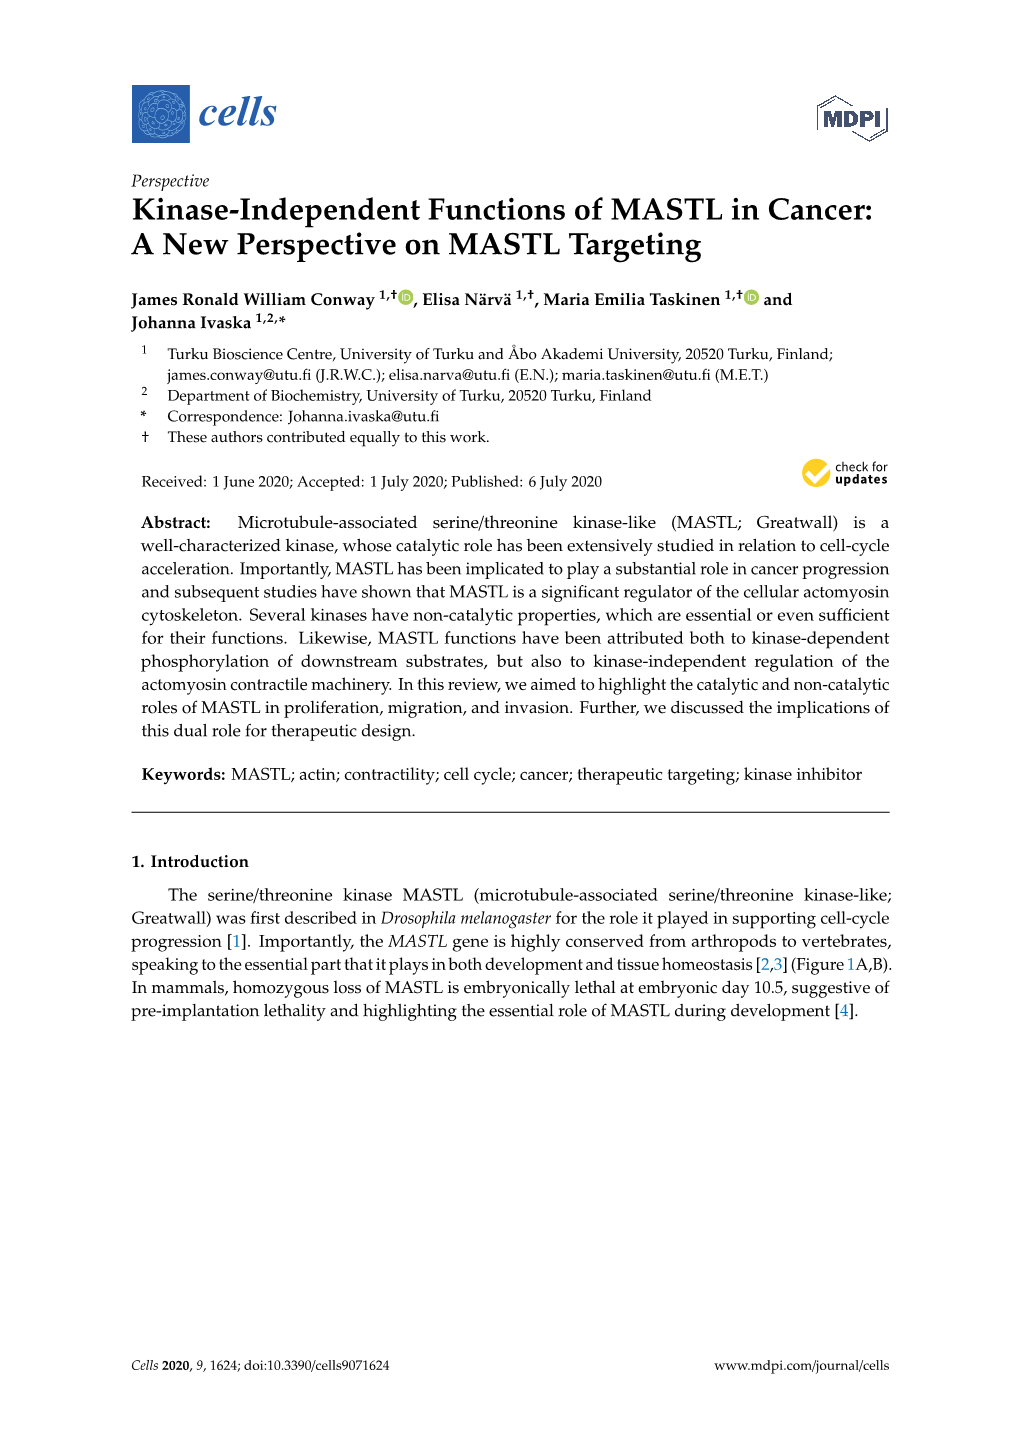 Kinase-Independent Functions of MASTL in Cancer: a New Perspective on MASTL Targeting